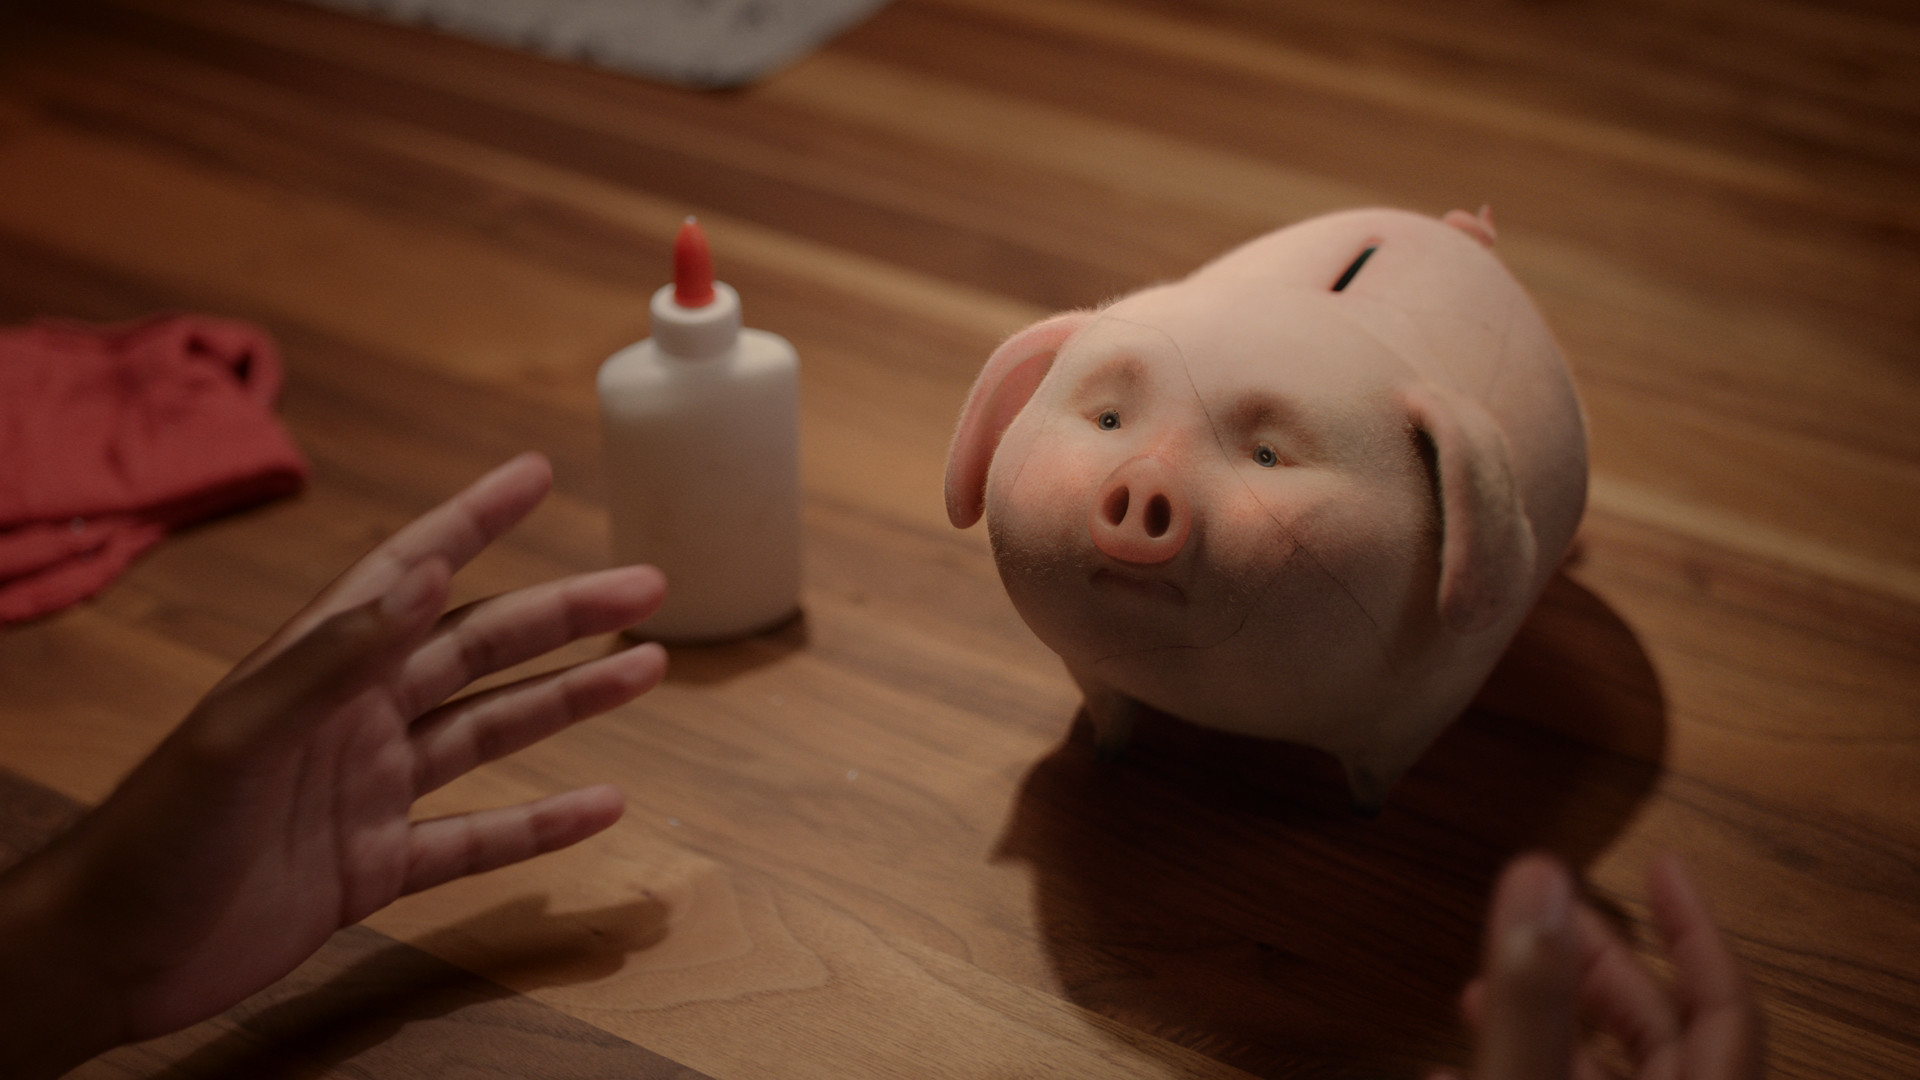 cg animated photo realistic piggy bank that has been glued back together